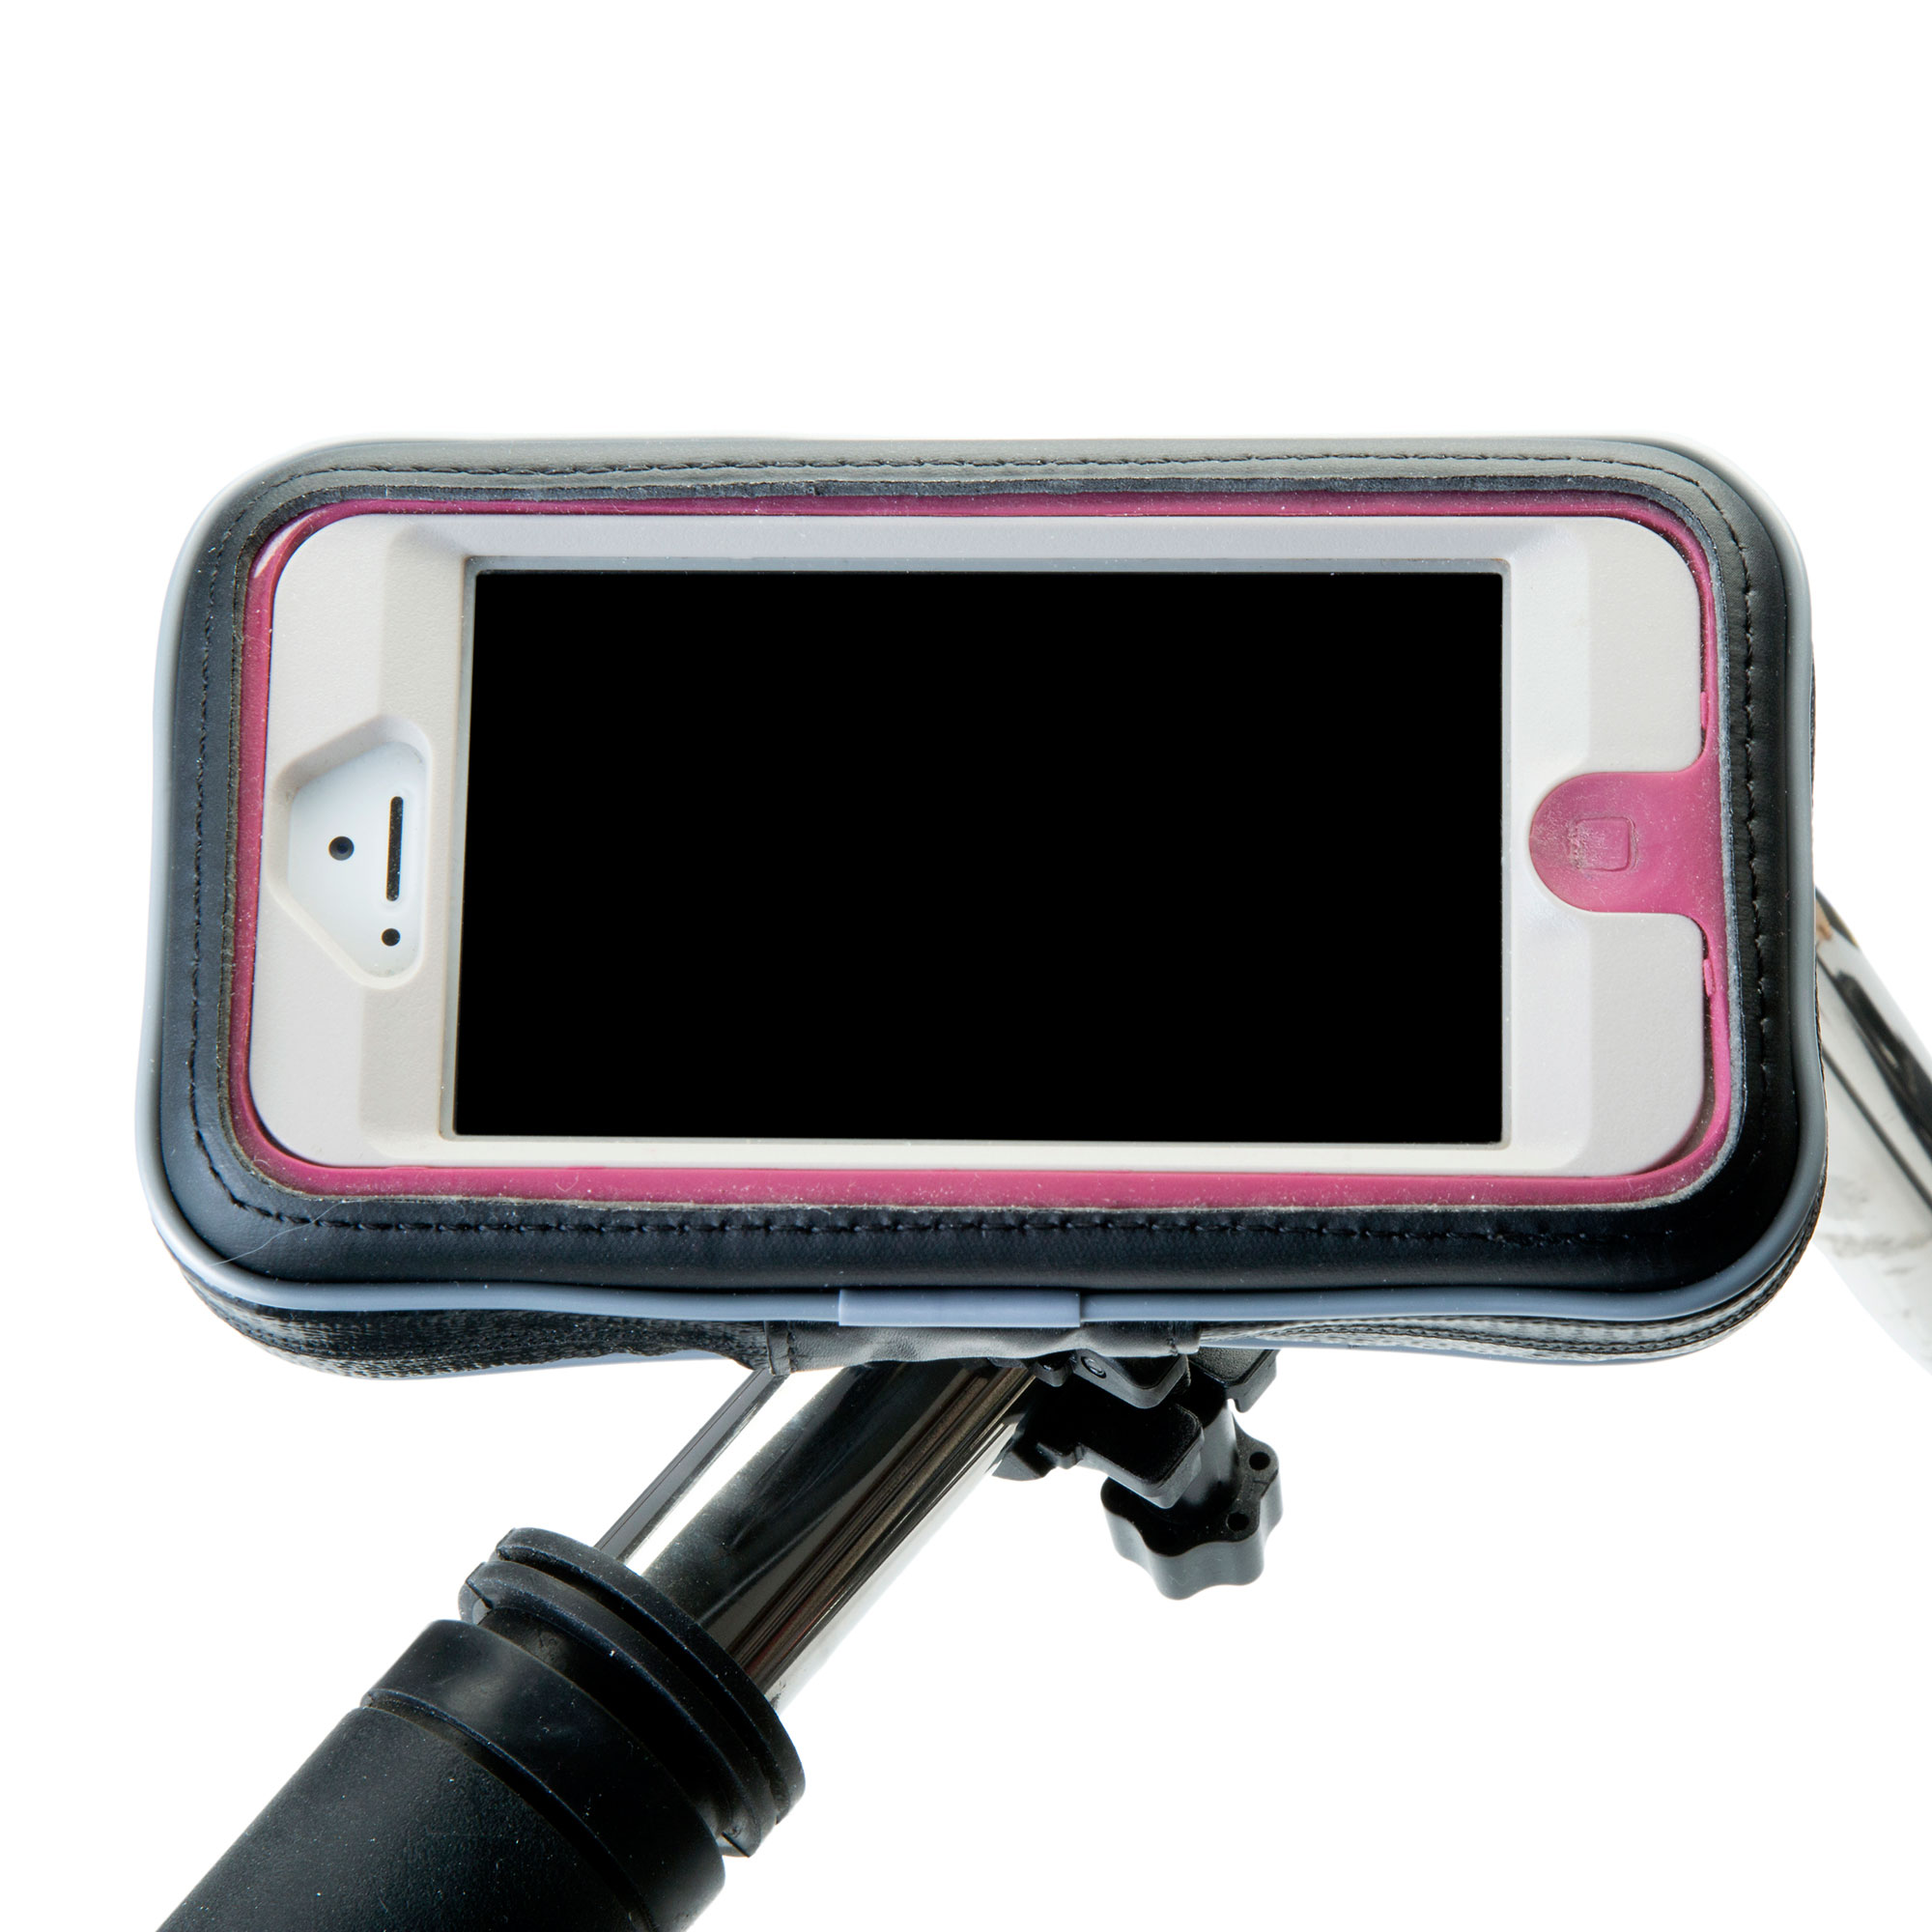 Heavy Duty Weather Resistant Bicycle / Motorcycle Handlebar Mount Holder Designed for the Motorola Olympus MB860